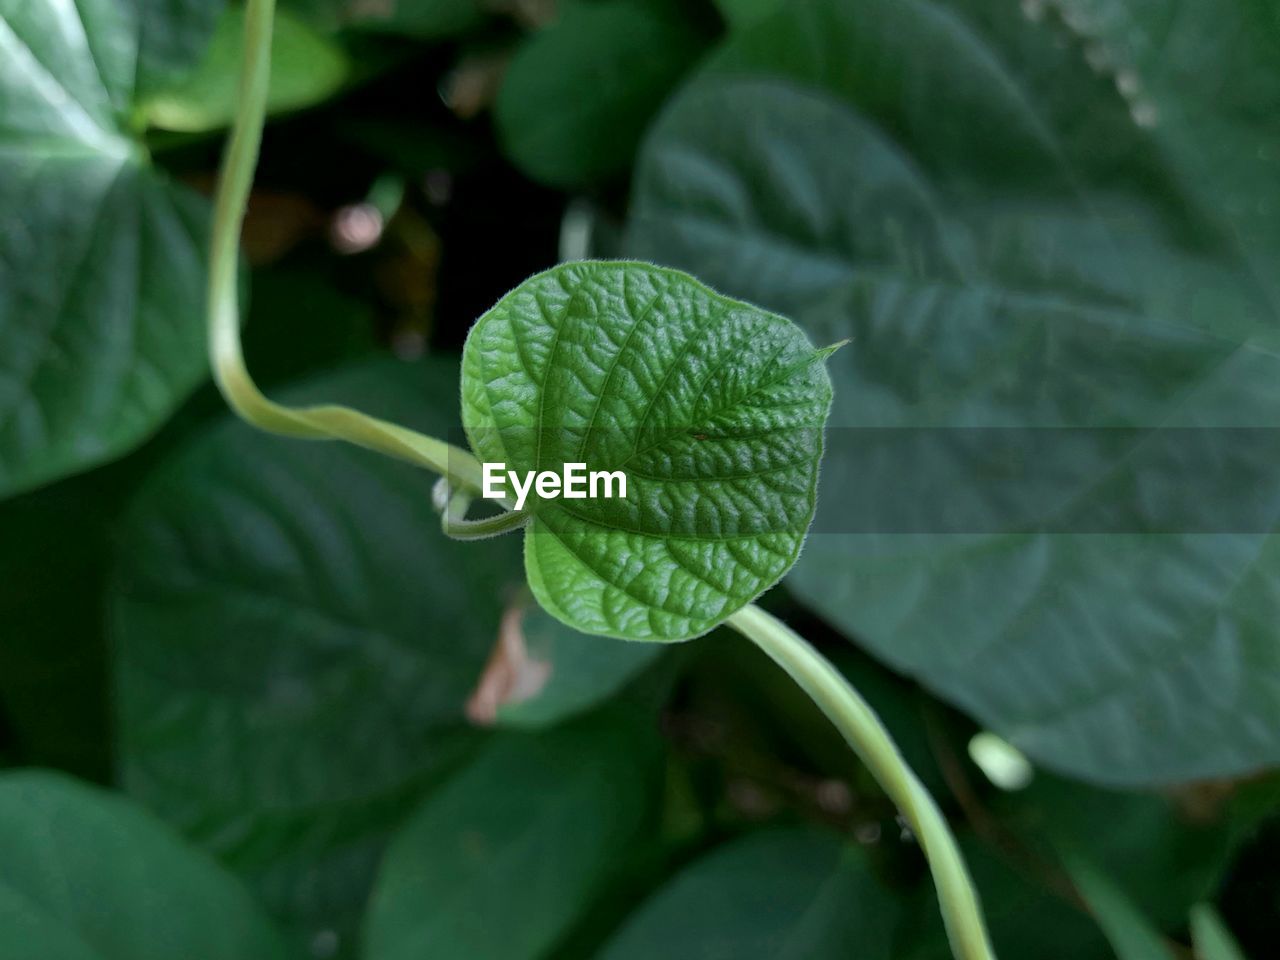 leaf, plant part, plant, green, growth, flower, nature, close-up, freshness, beauty in nature, food, food and drink, no people, healthy eating, vegetable, outdoors, day, agriculture, environment, water, produce, botany, flowering plant, fruit, leaf vein, drop, land